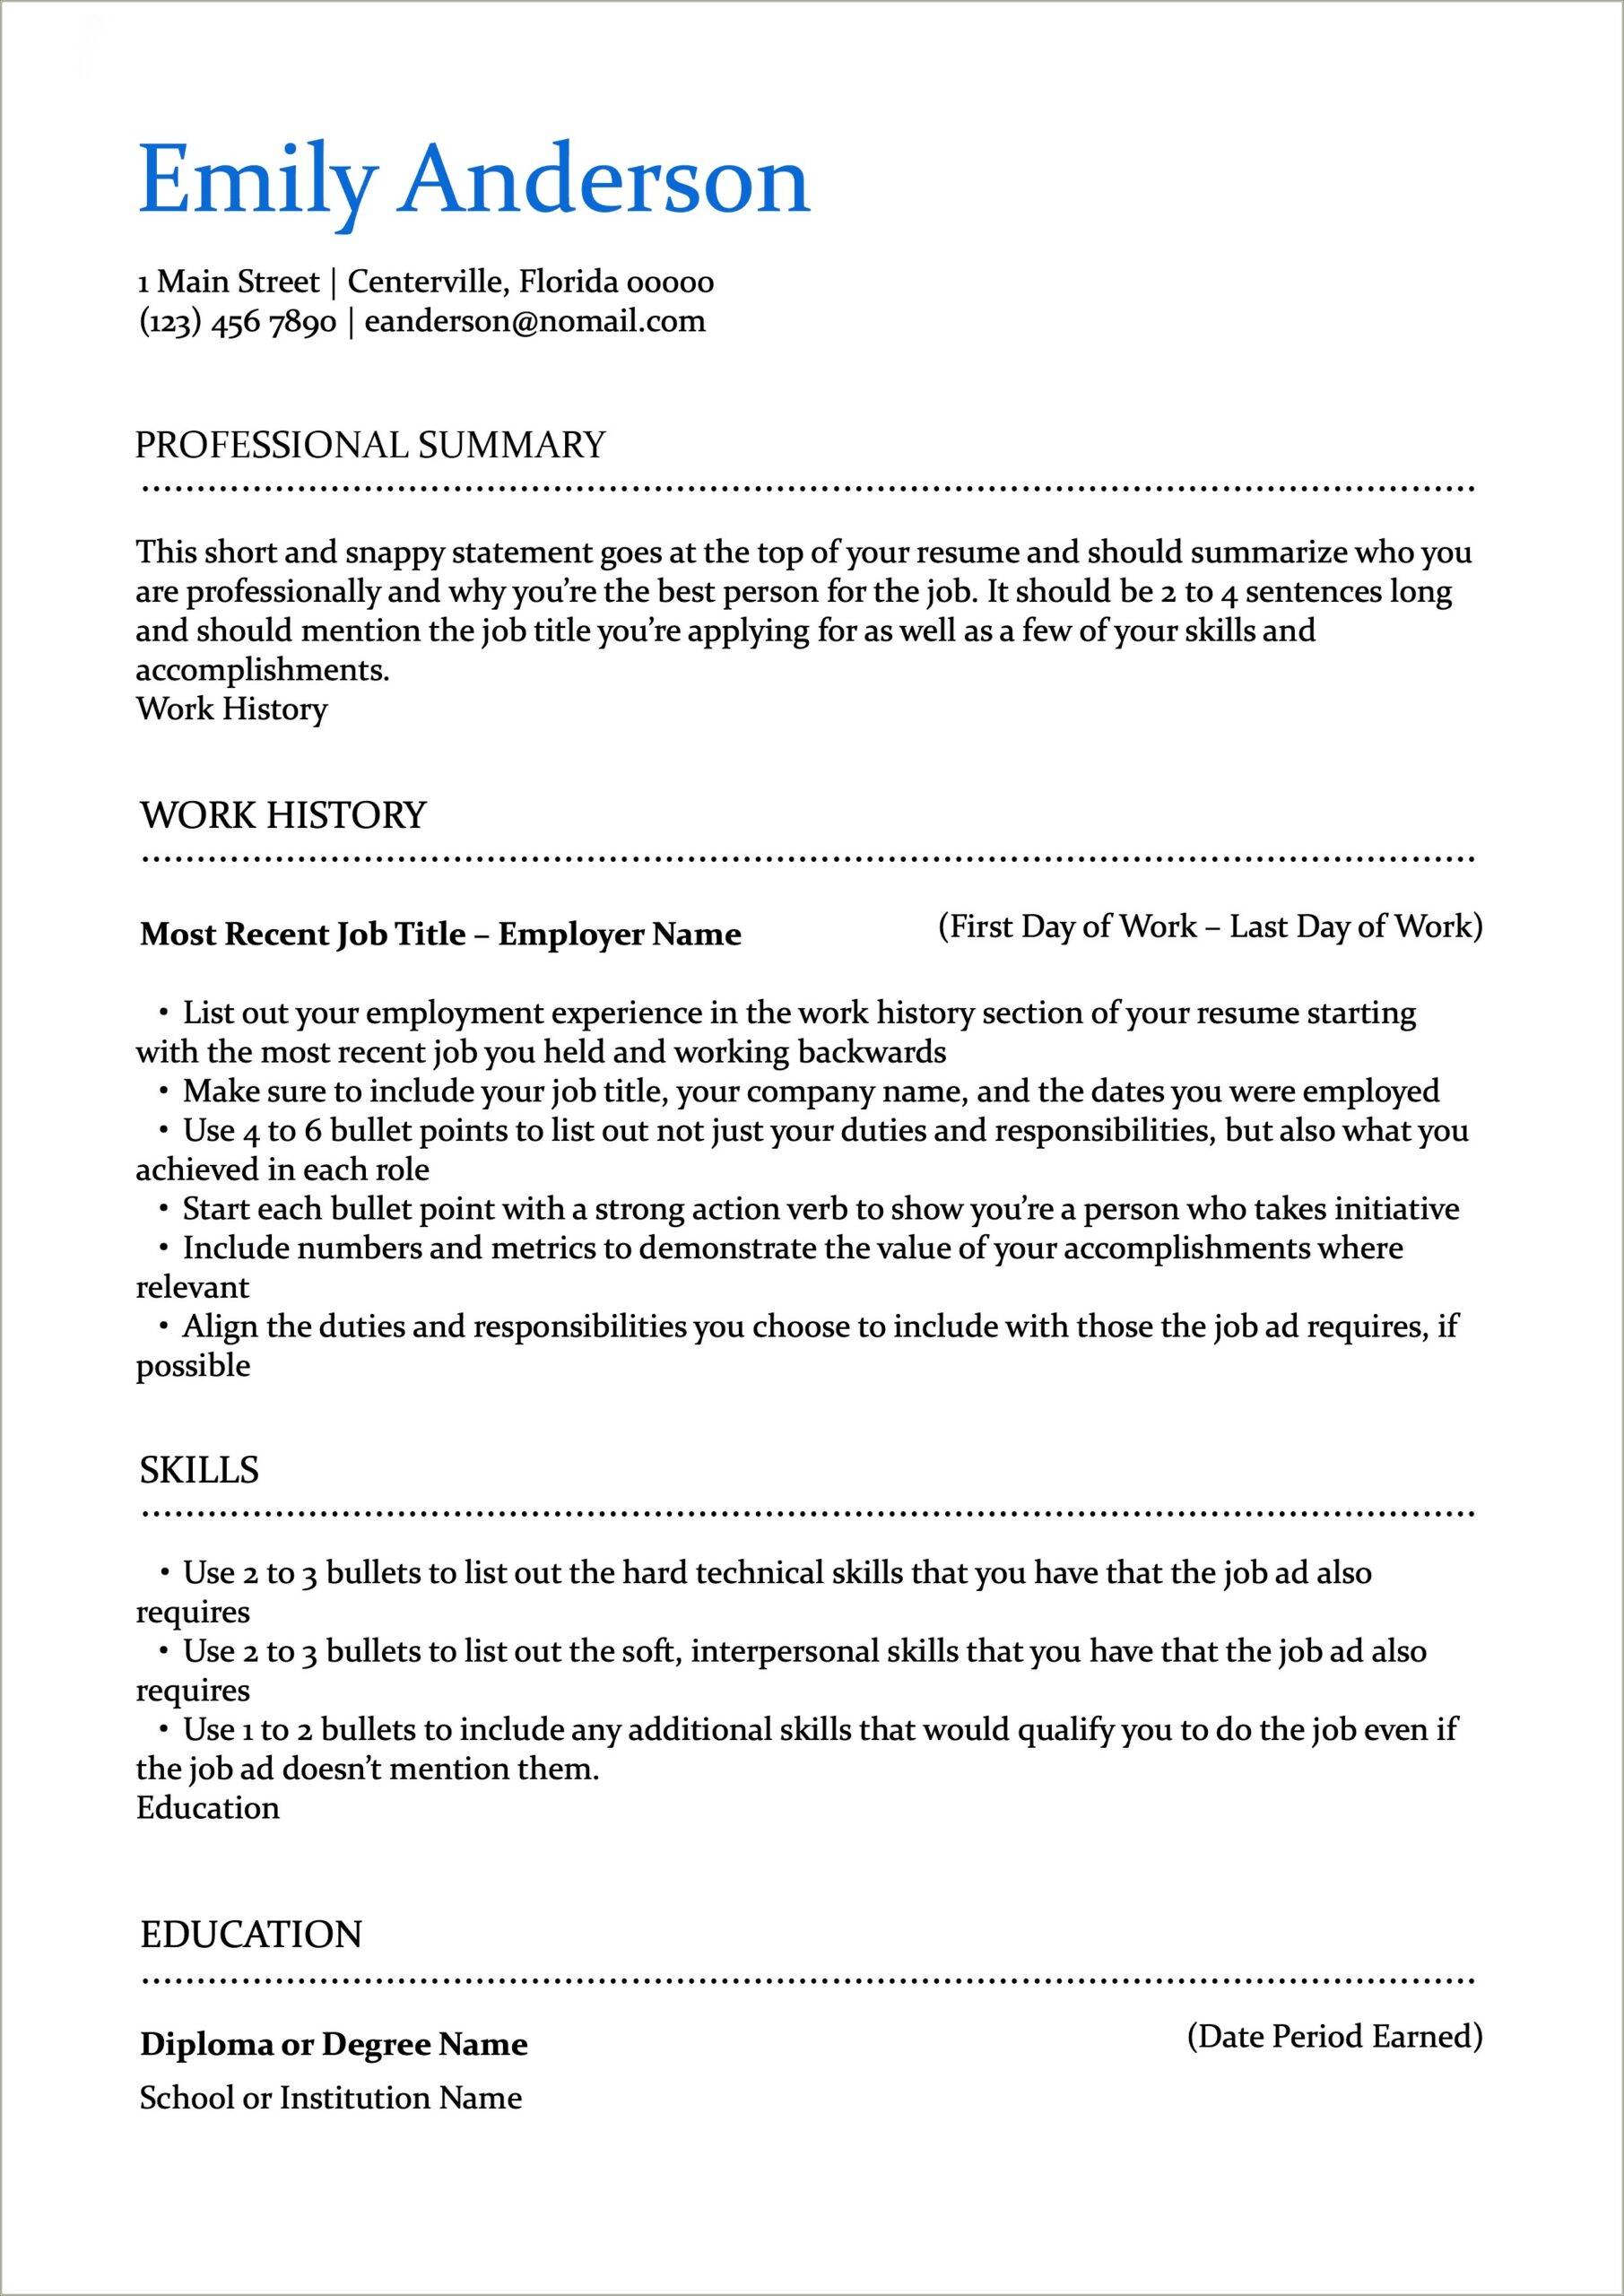 Director Of Special Education Resume Example